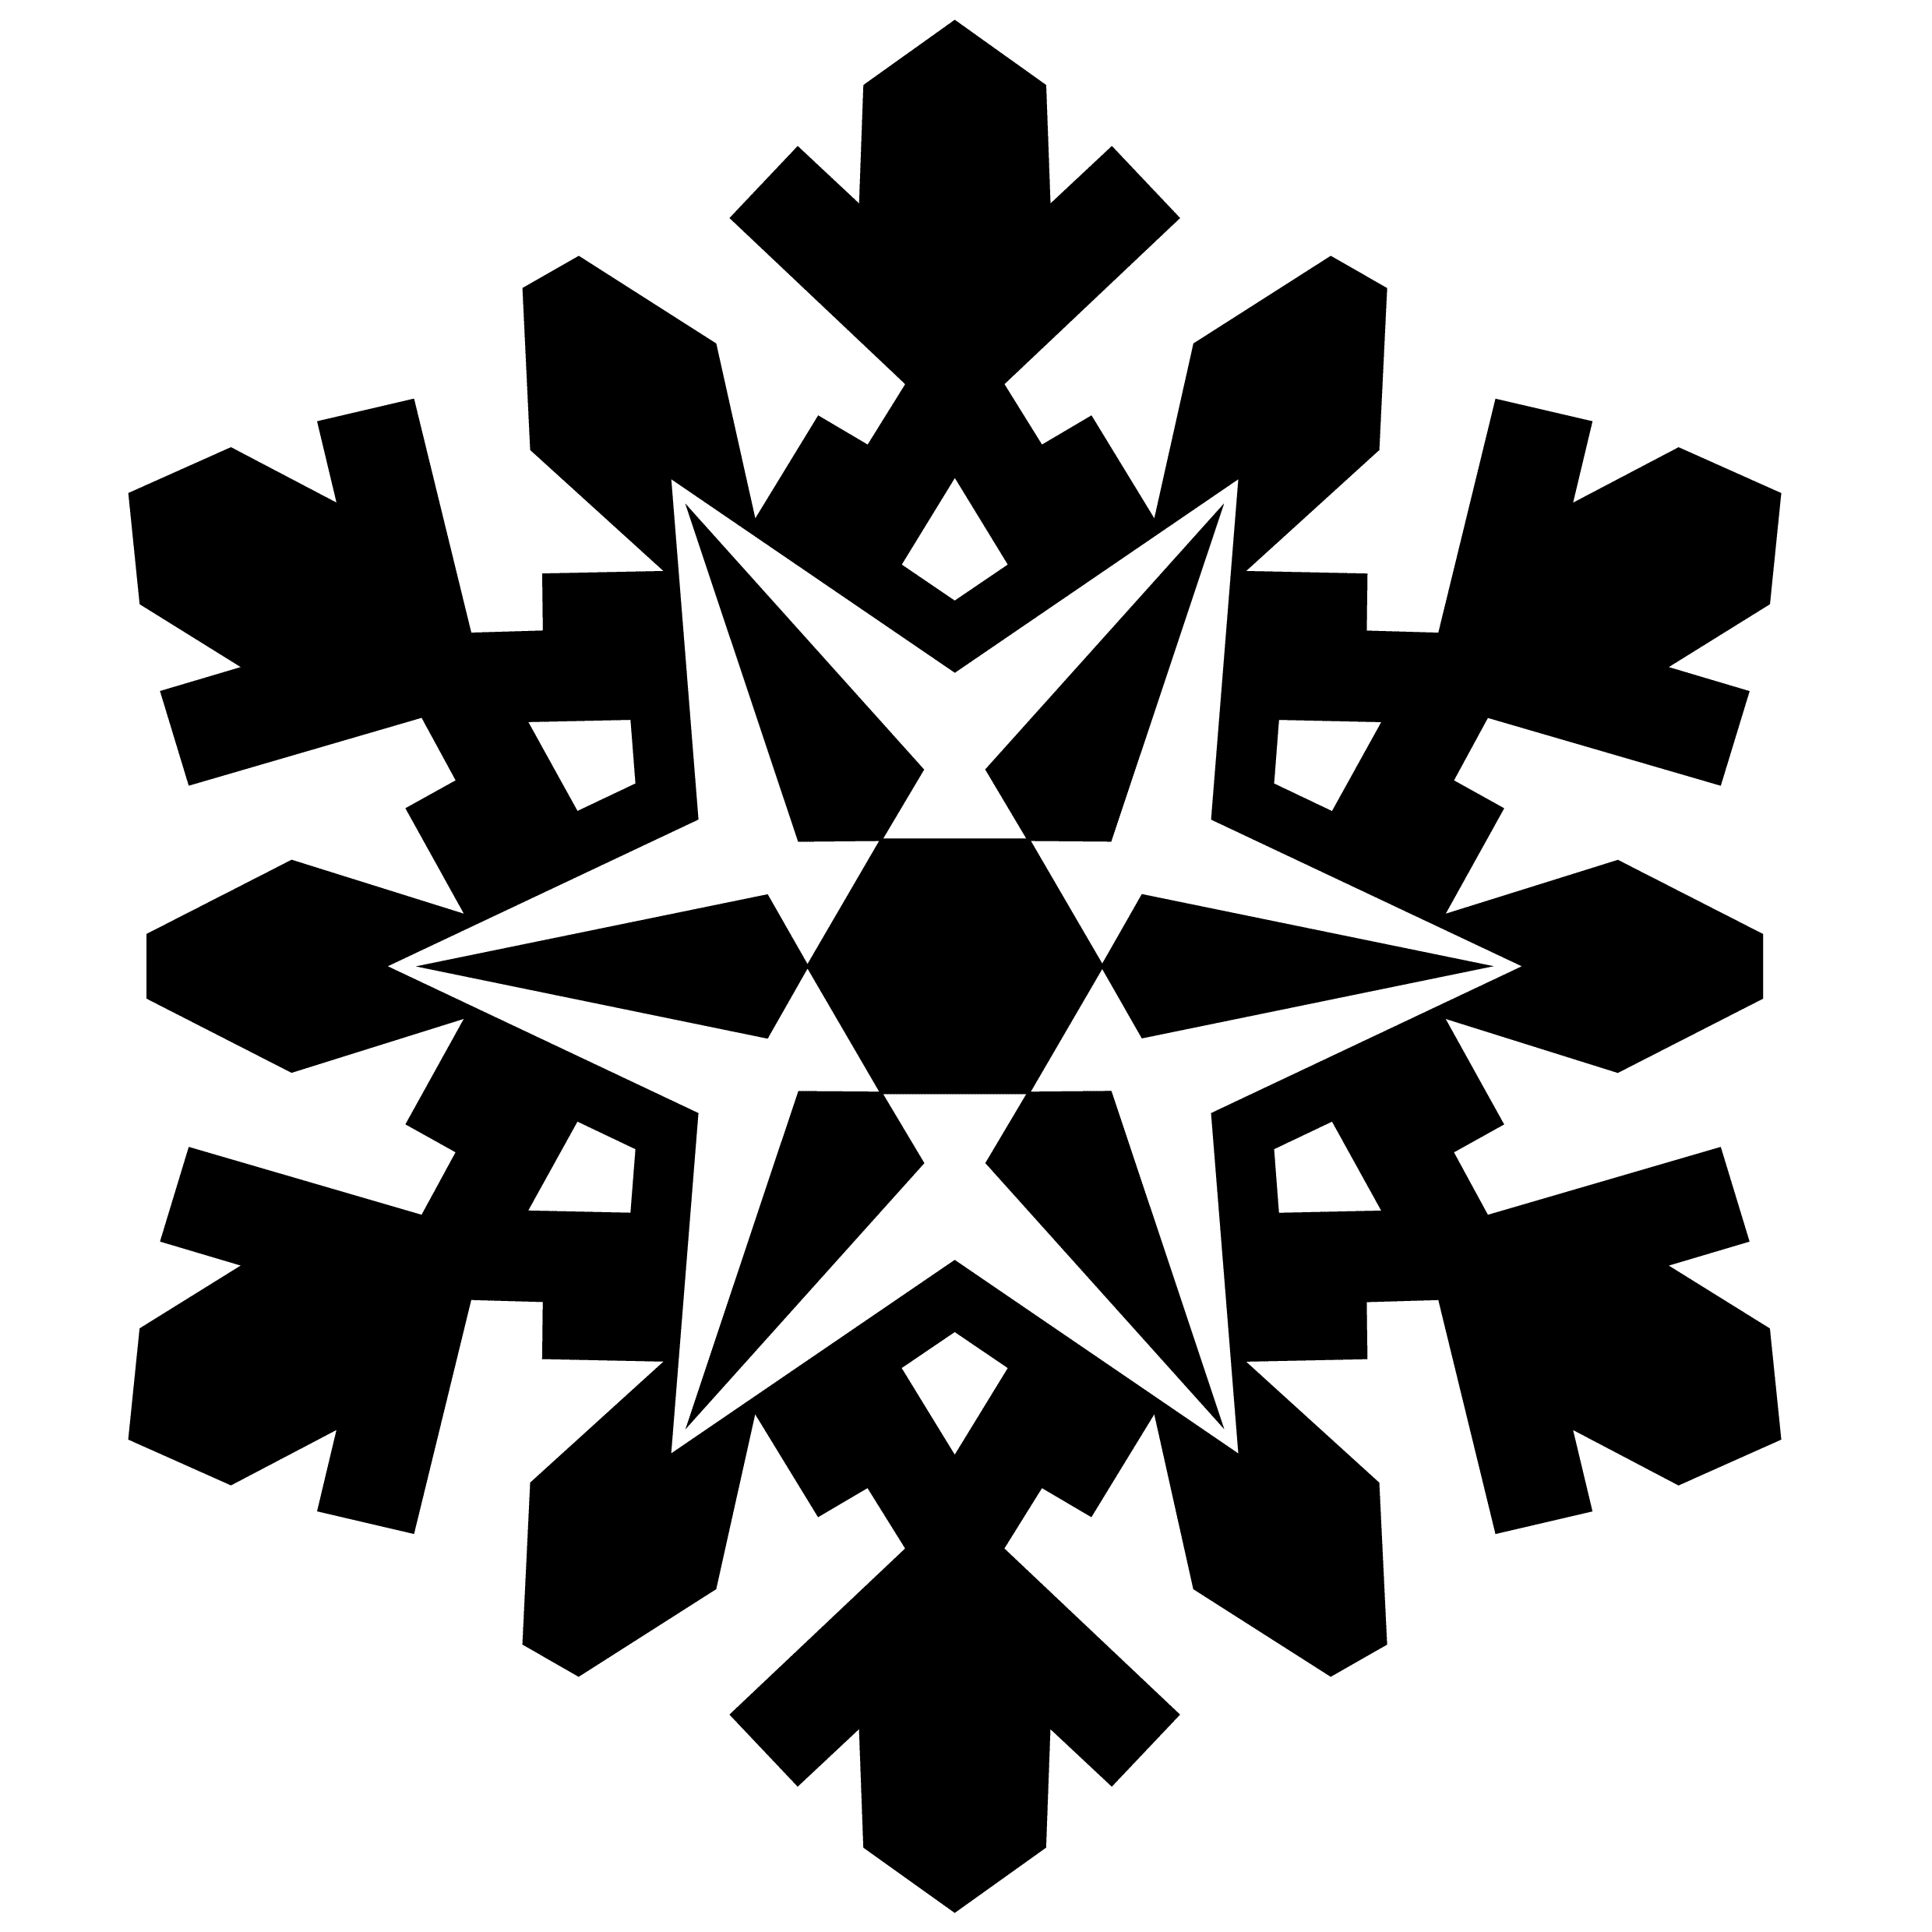 52 Snowflakes Vectors, Silhouette and Photoshop Brushes for 